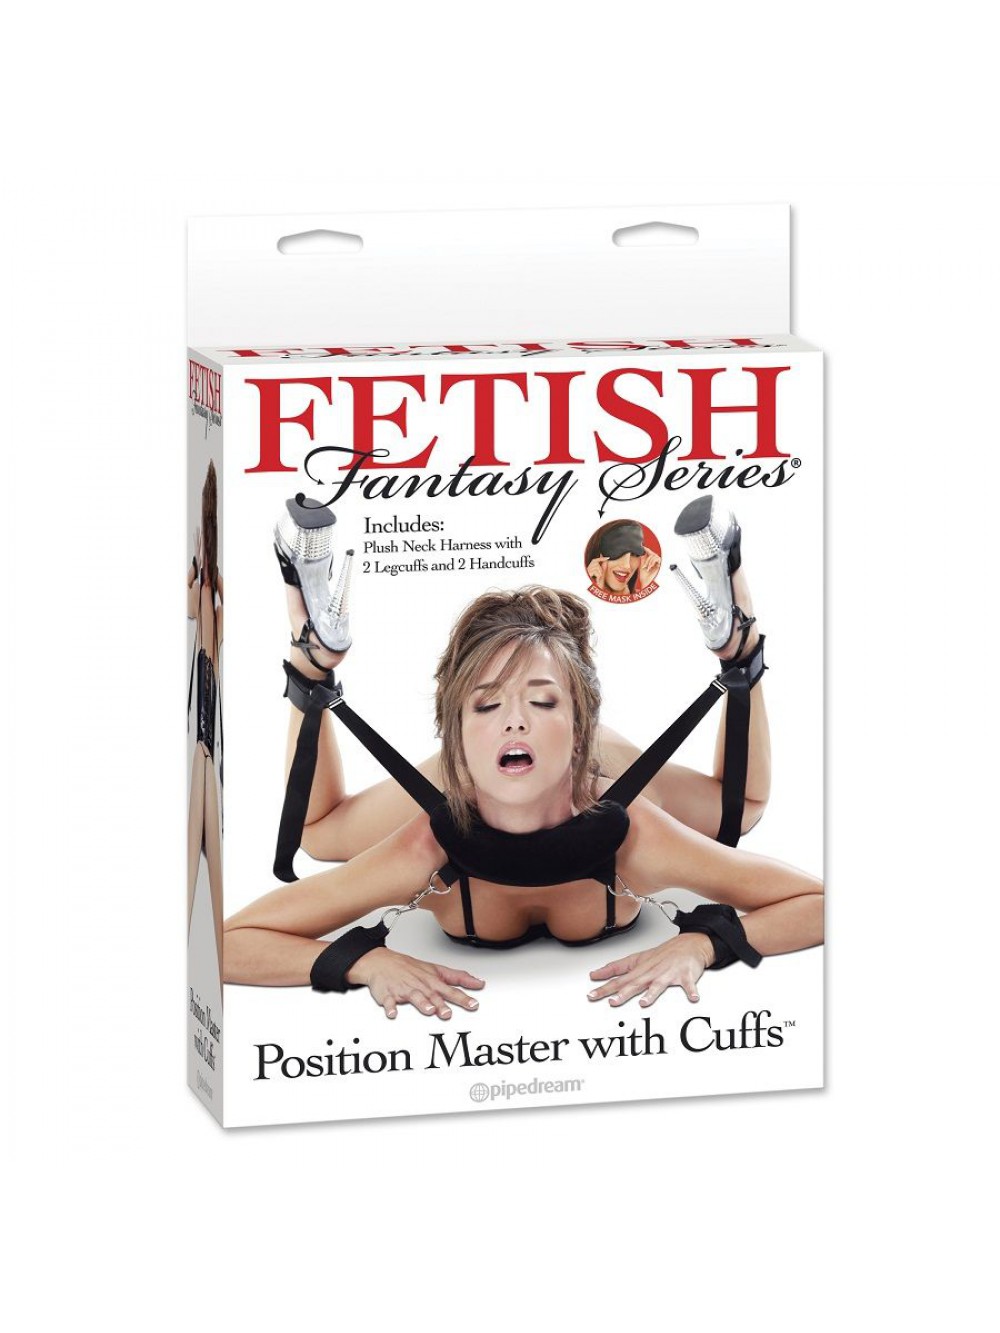 POSITION MASTER WITH CUFFS